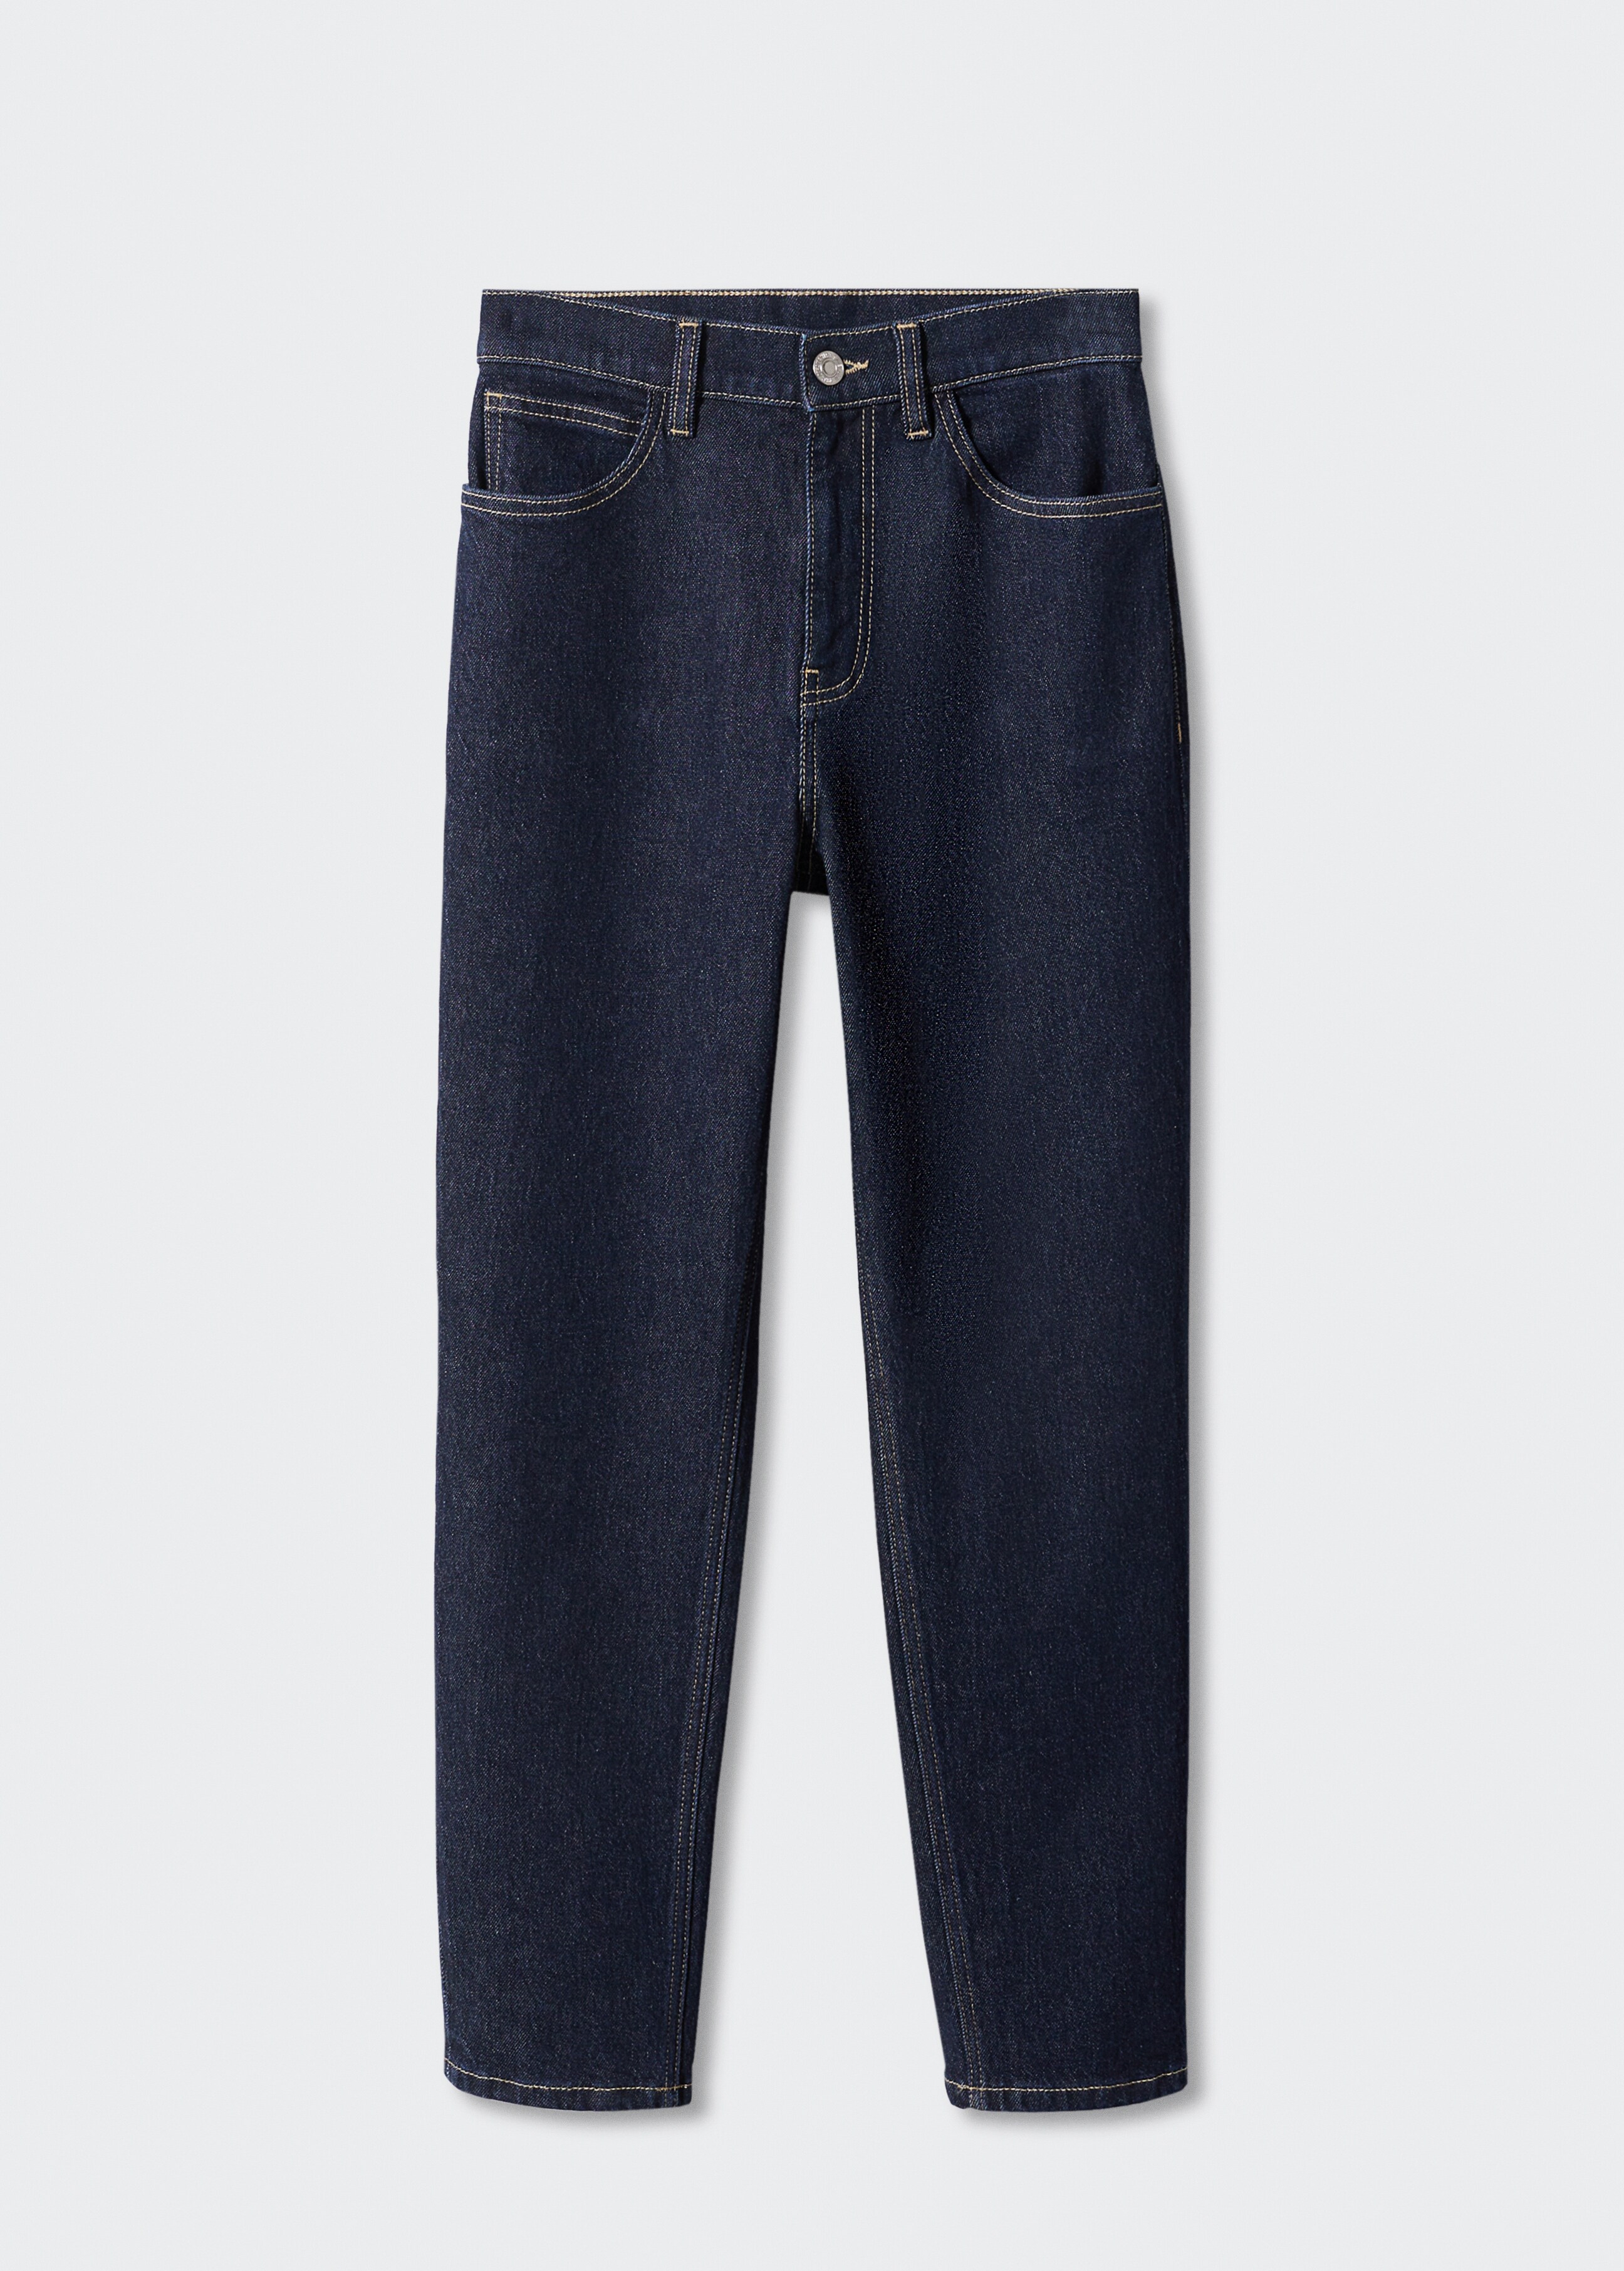 Jeans Newmom comfort high rise - Article without model